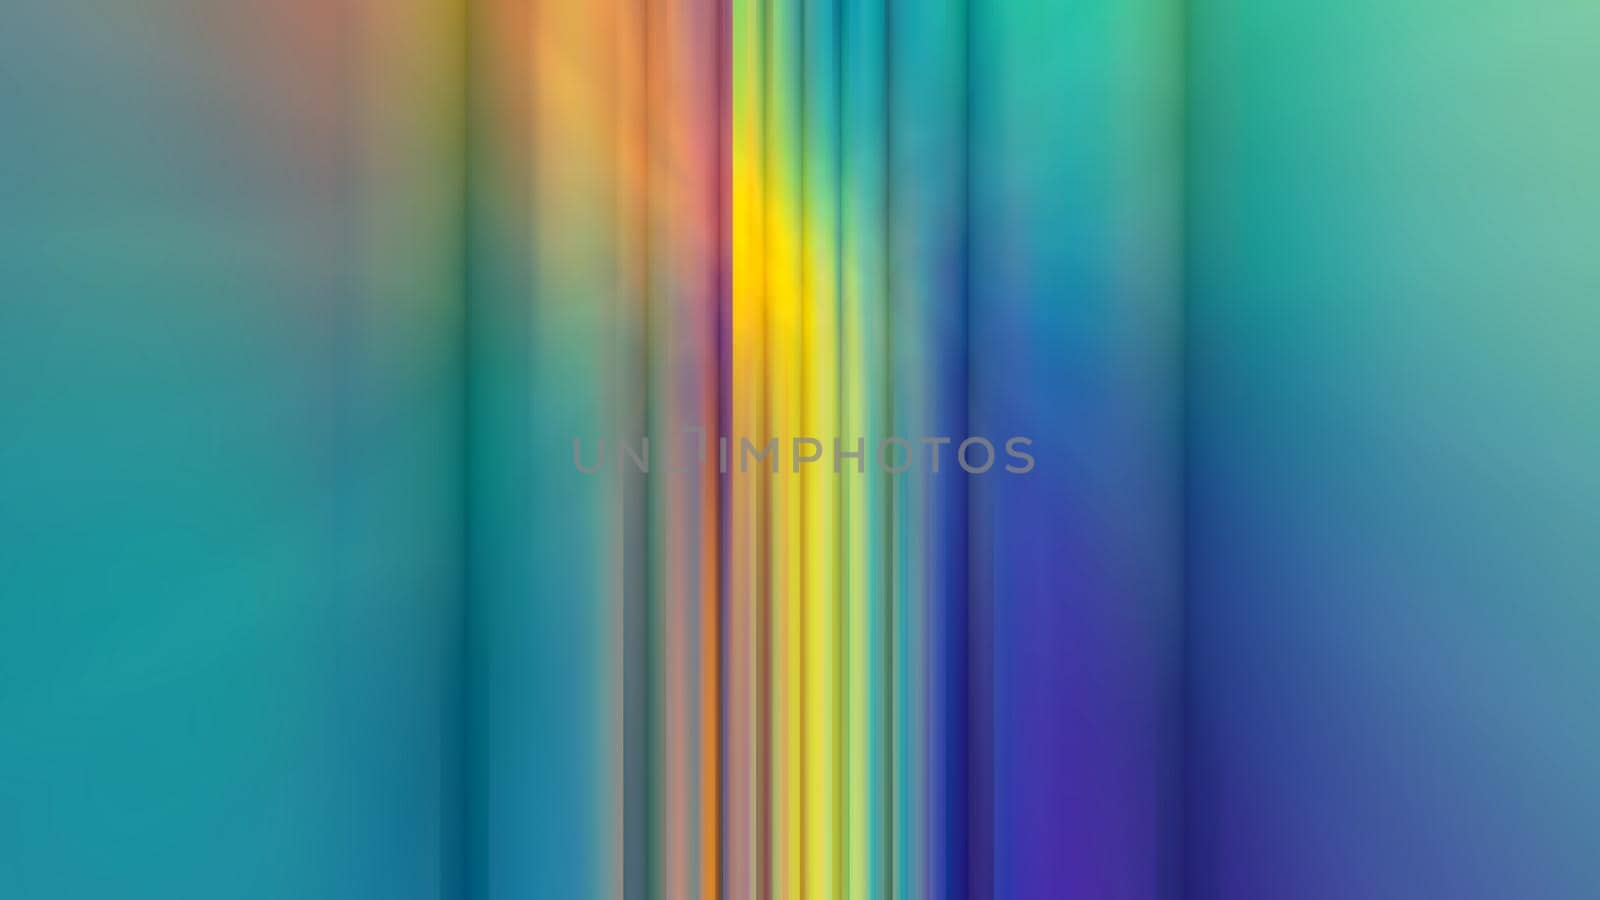 Abstract multicolored linear gradient background. Design, art